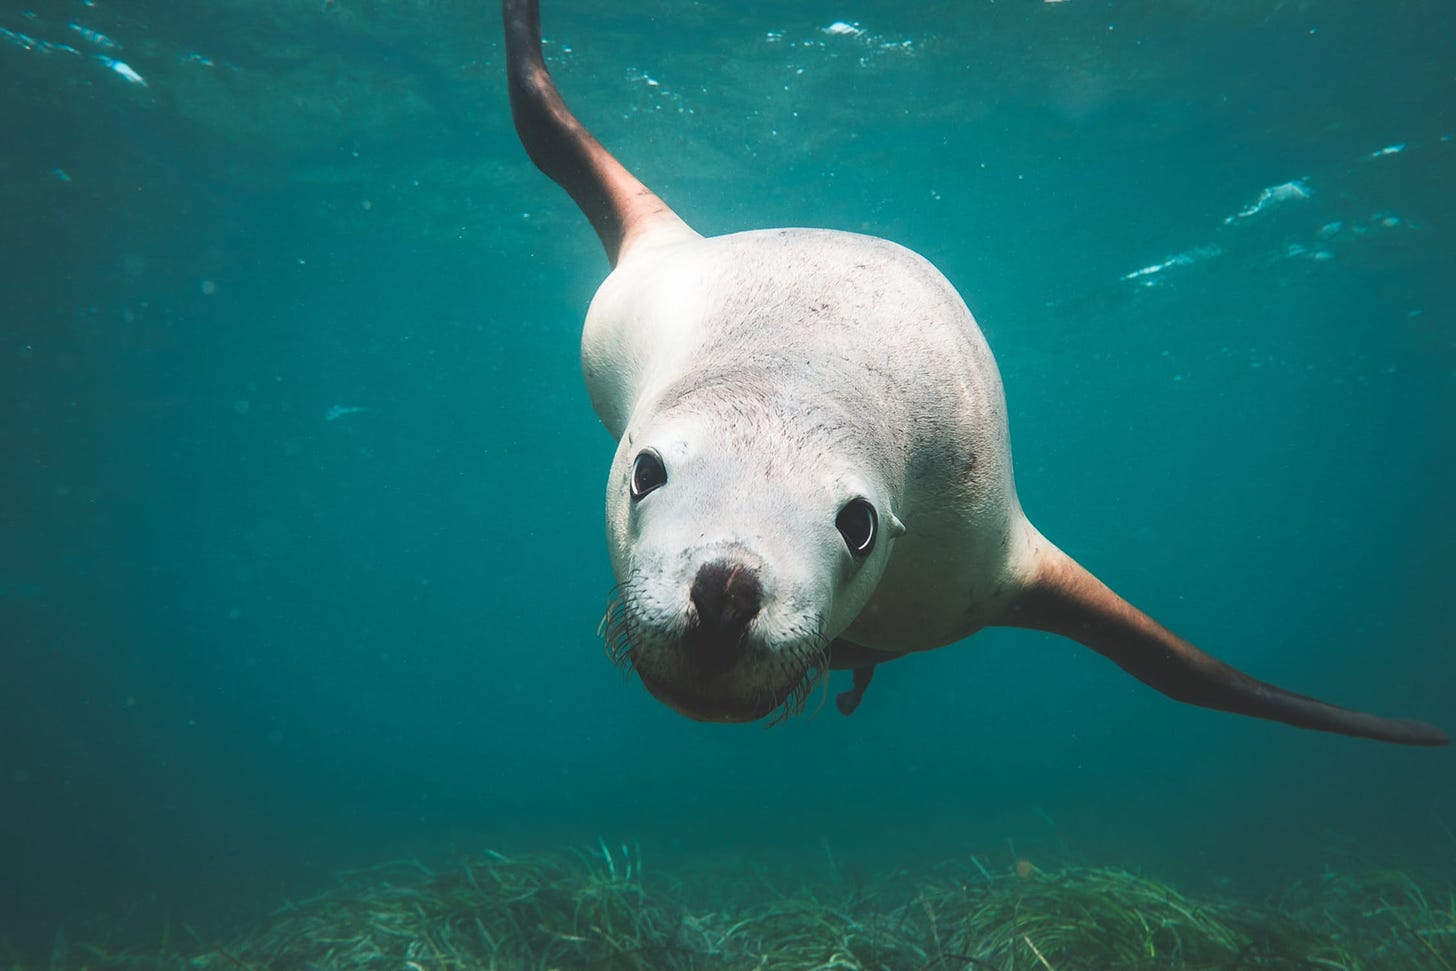 A sea lion underwater stares at the camera